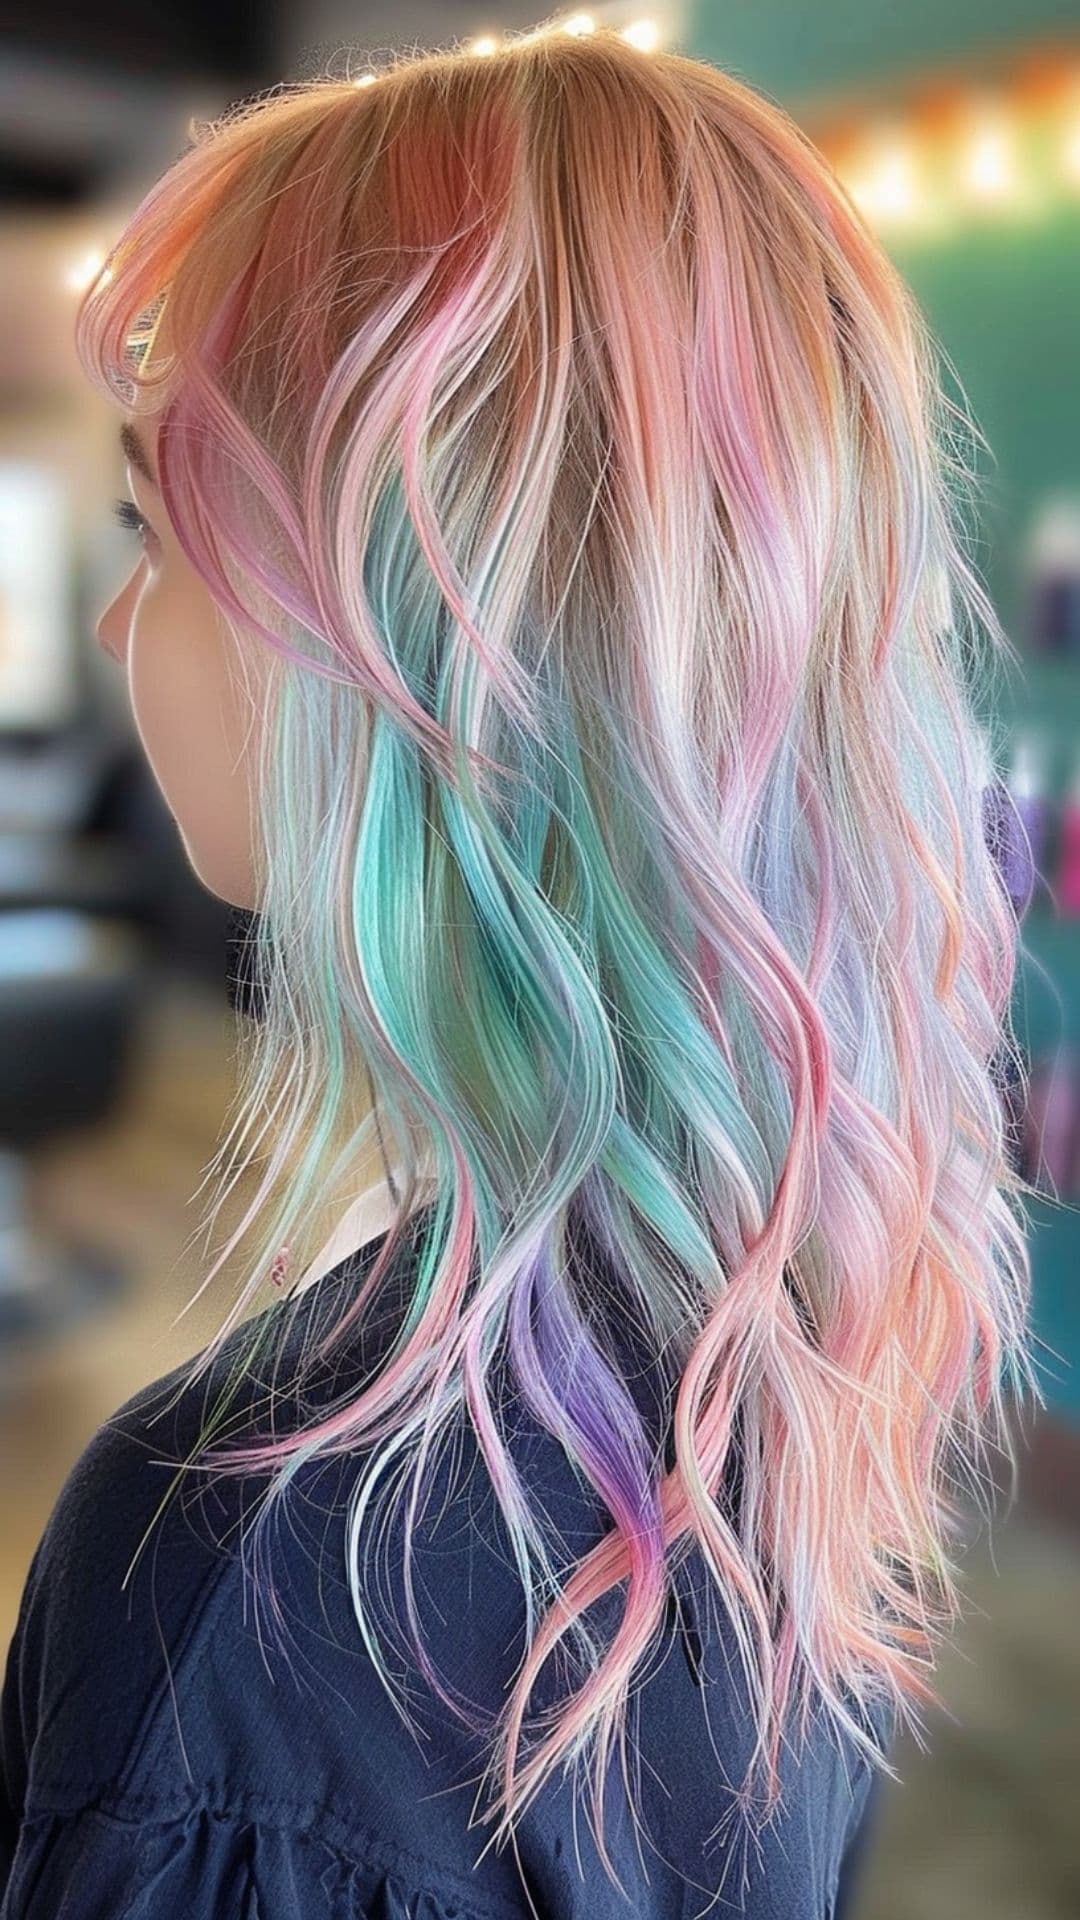 A young woman modelling a cotton candy hair.